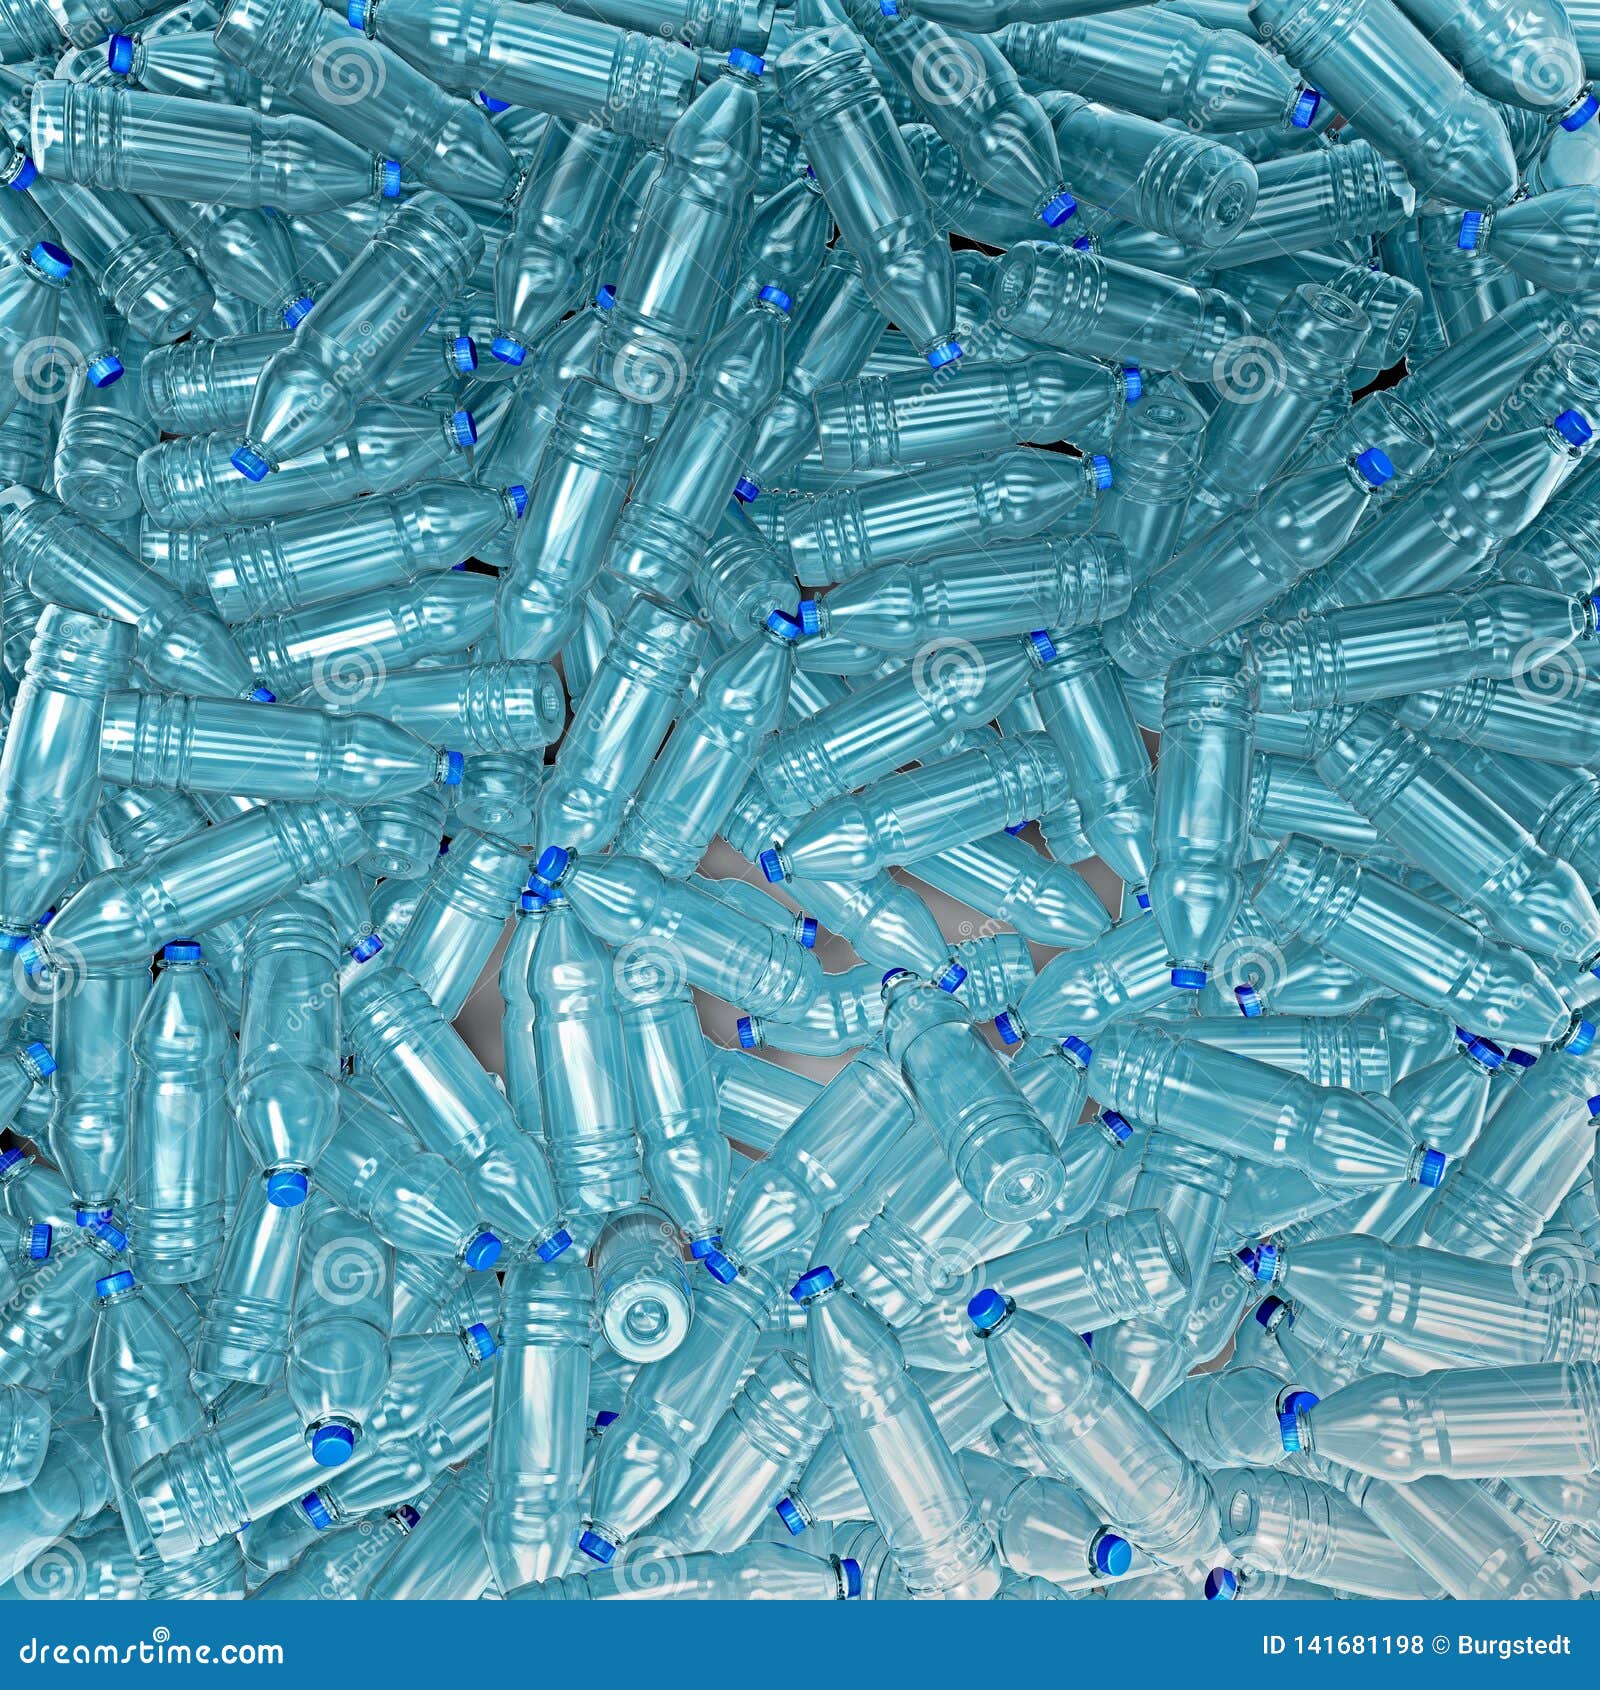 hundreds of plastic drinking bottles wildly mixed up on a big heap